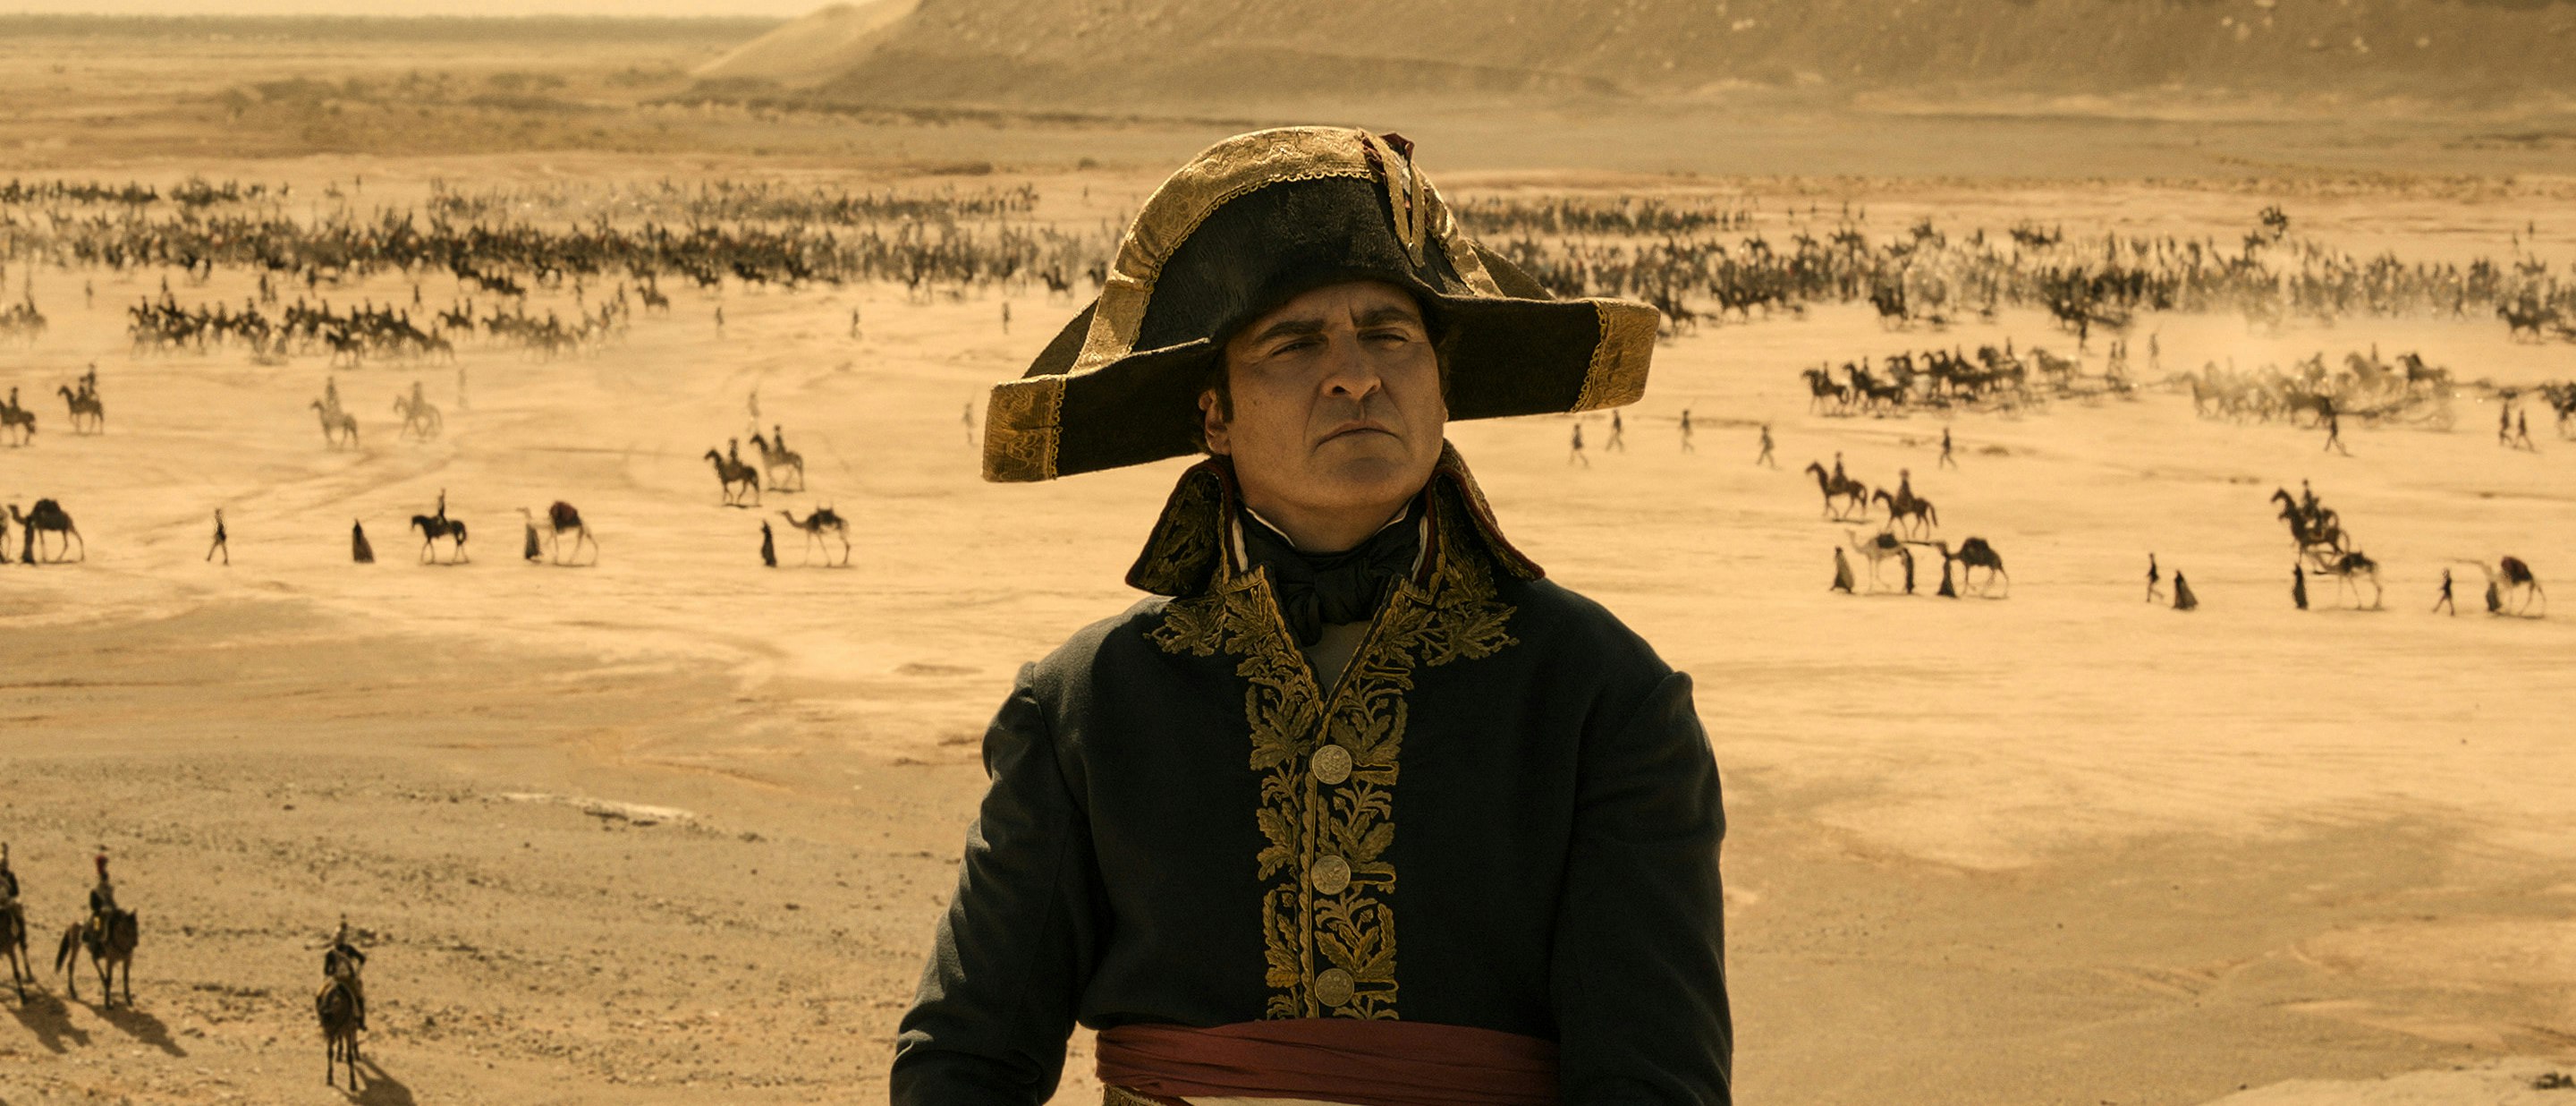 See Napoleon on the BIG screen with on-screen captions at select Harkins locations.